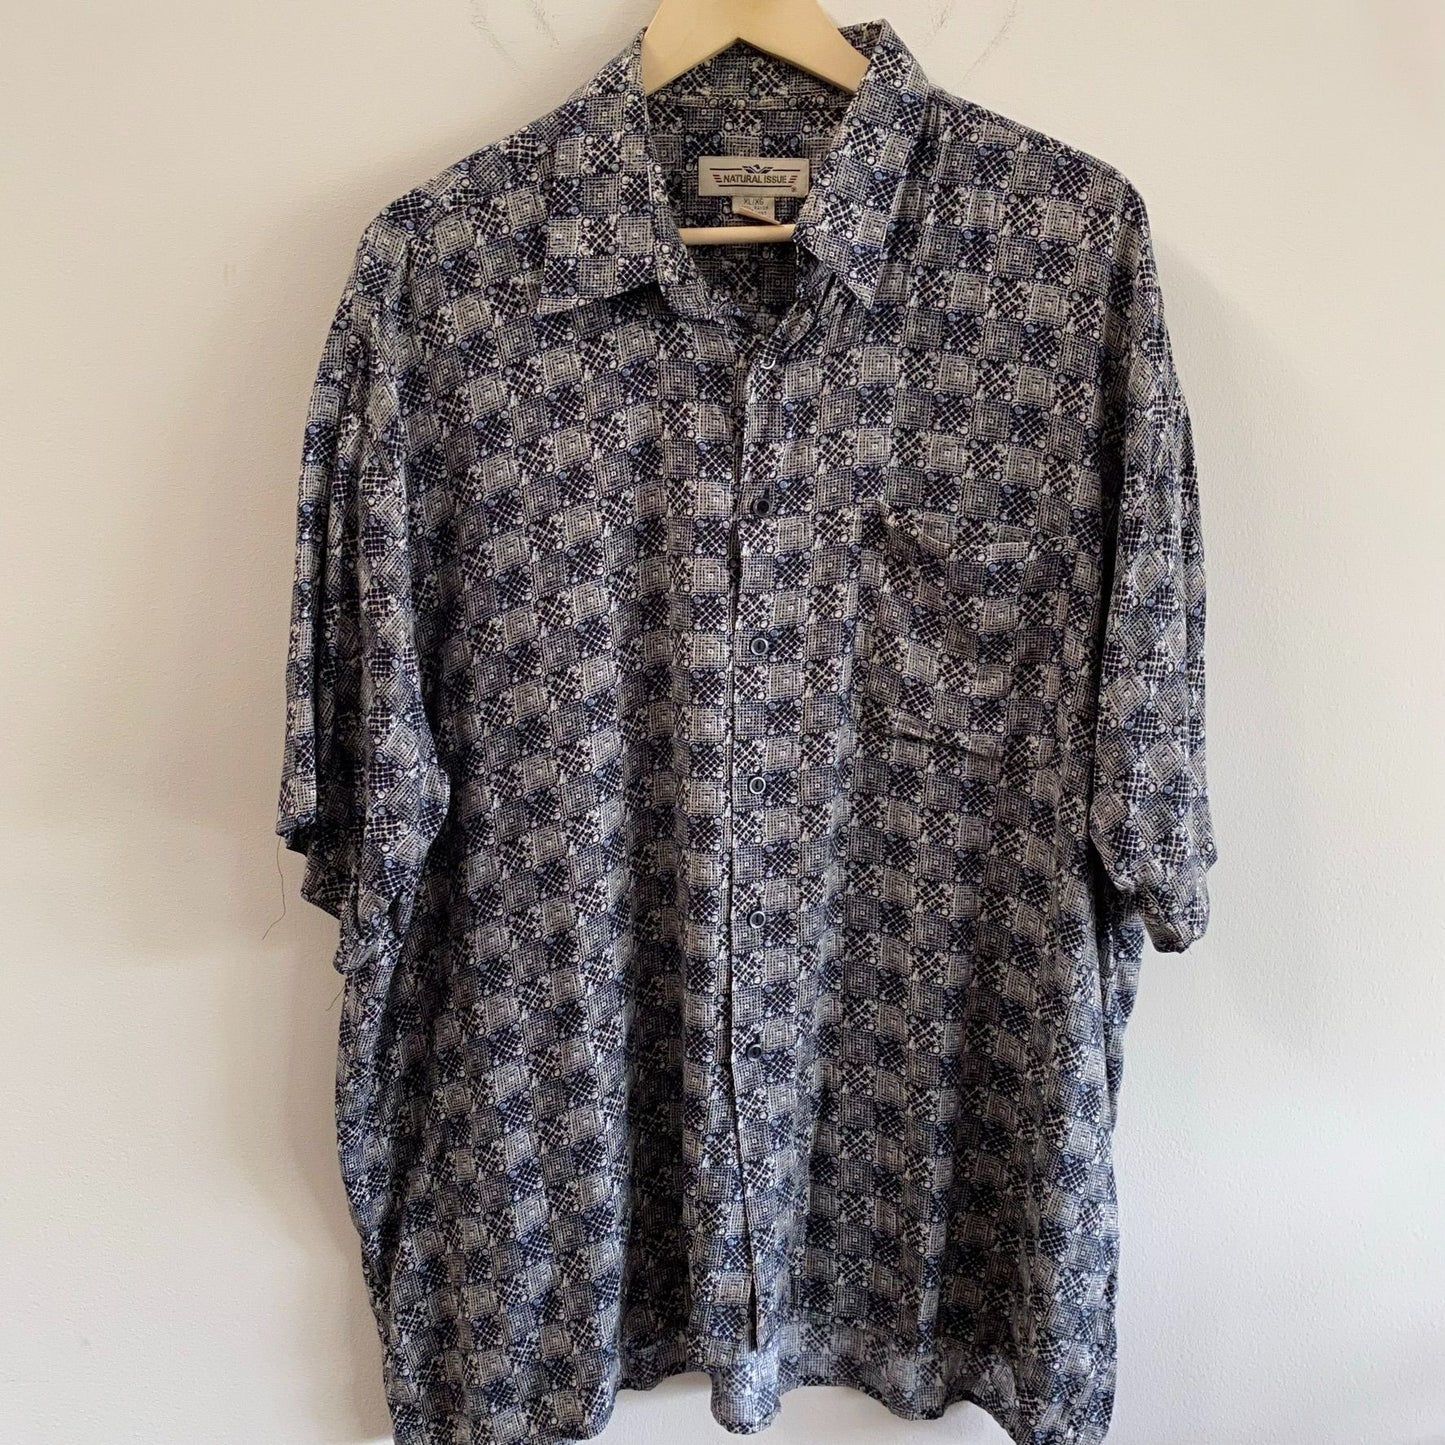 Vintage Natural Issue Geometric S/S Shirt